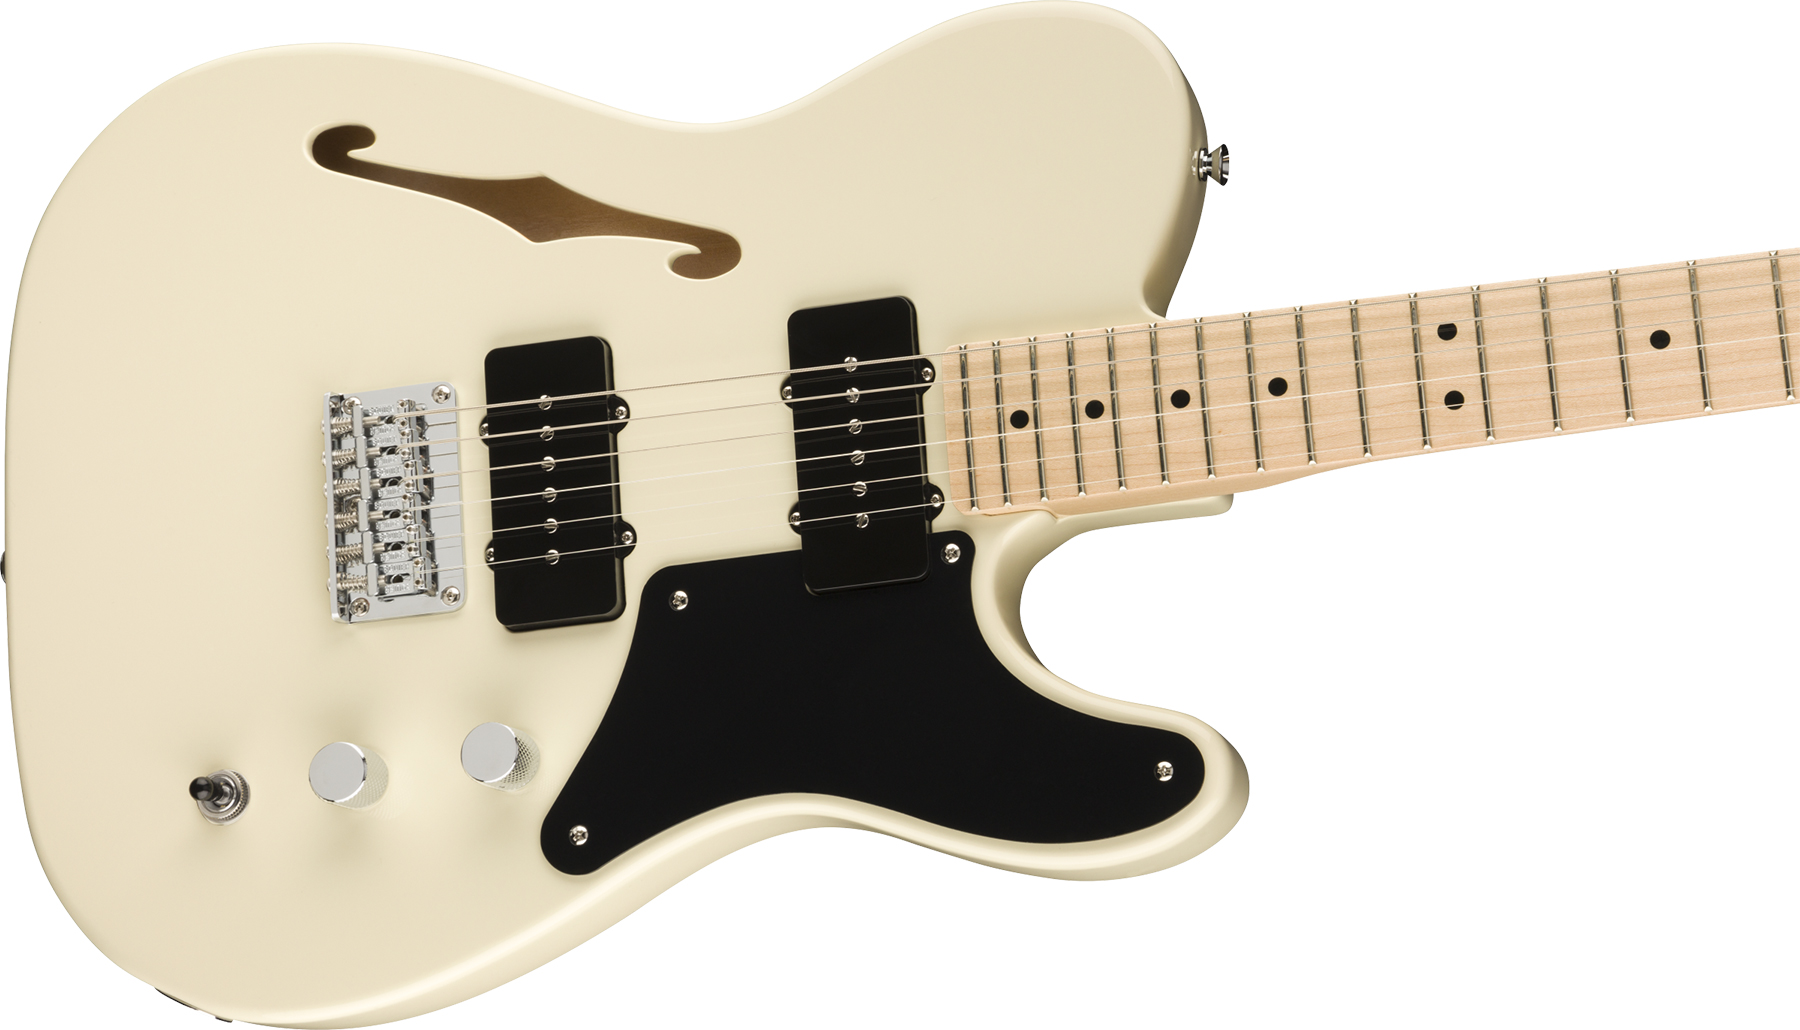 Squier Tele Thinline Cabronita Paranormal Ss Ht Mn - Olympic White - Tel shape electric guitar - Variation 2